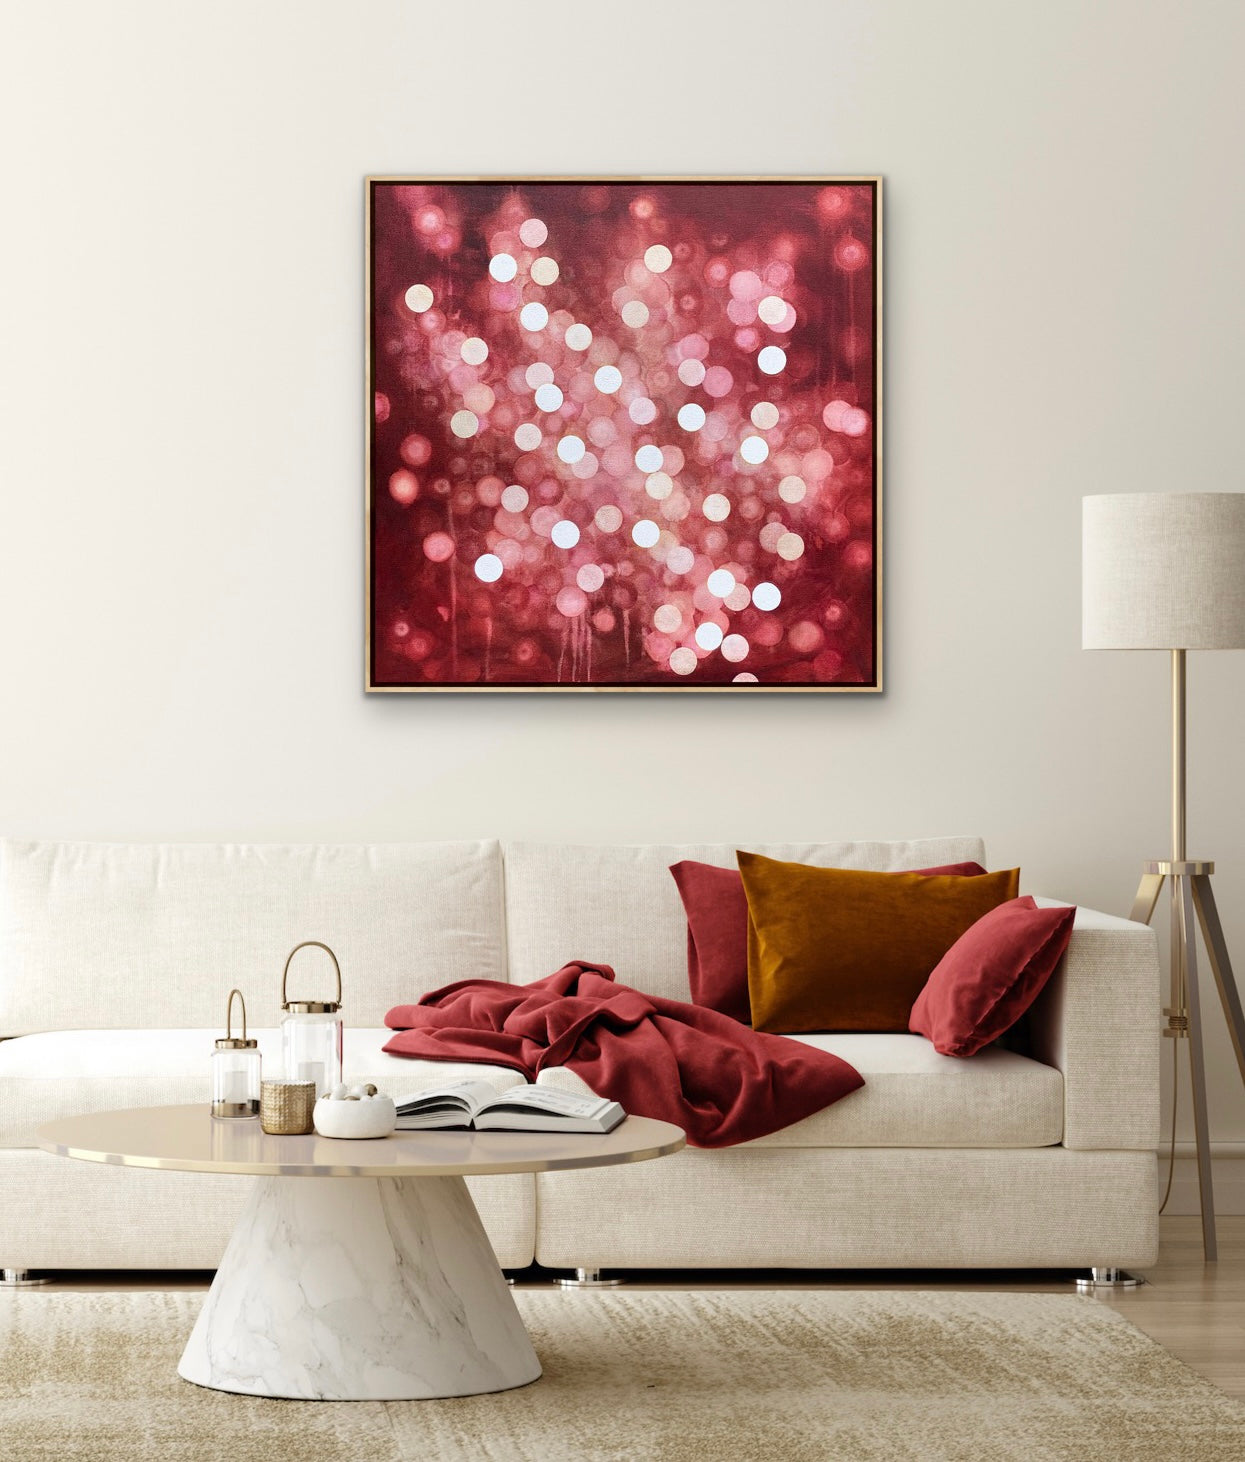 Aqueous Field Coral Bloom XV - Abstract Sealife Painting 79cm x 79cm